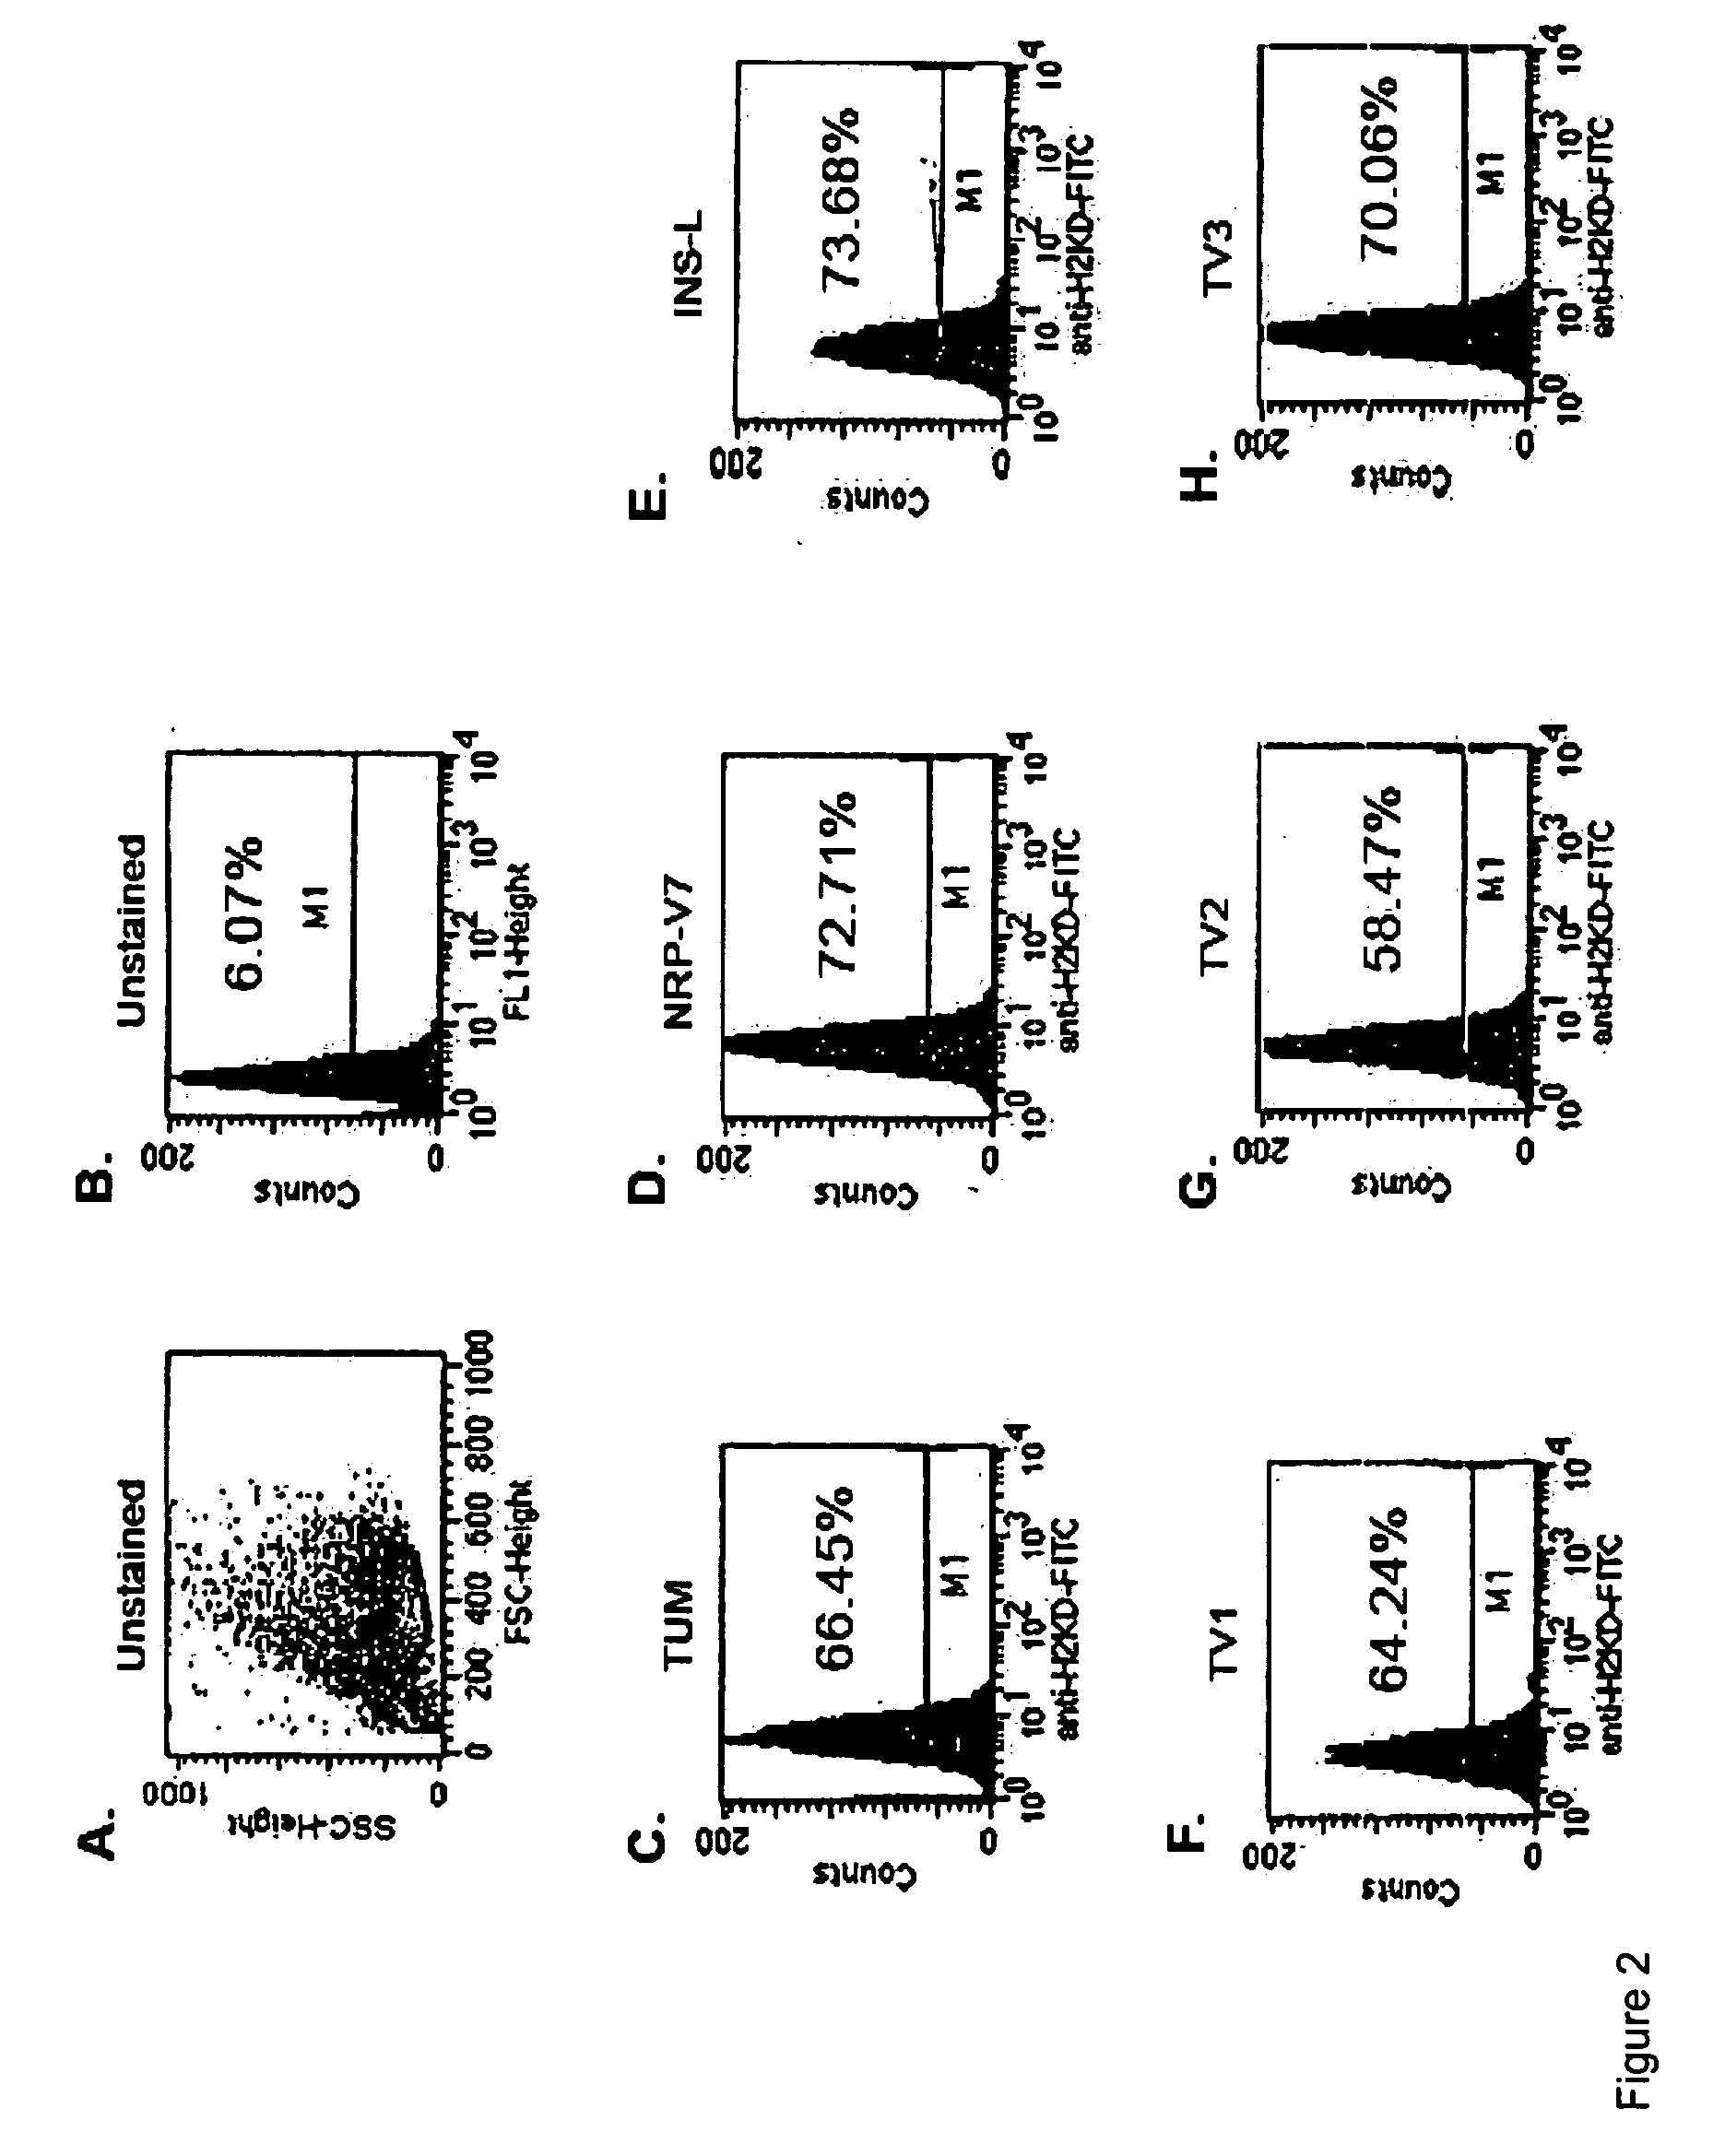 Insulin epitopes for the treatment of type 1 diabetes